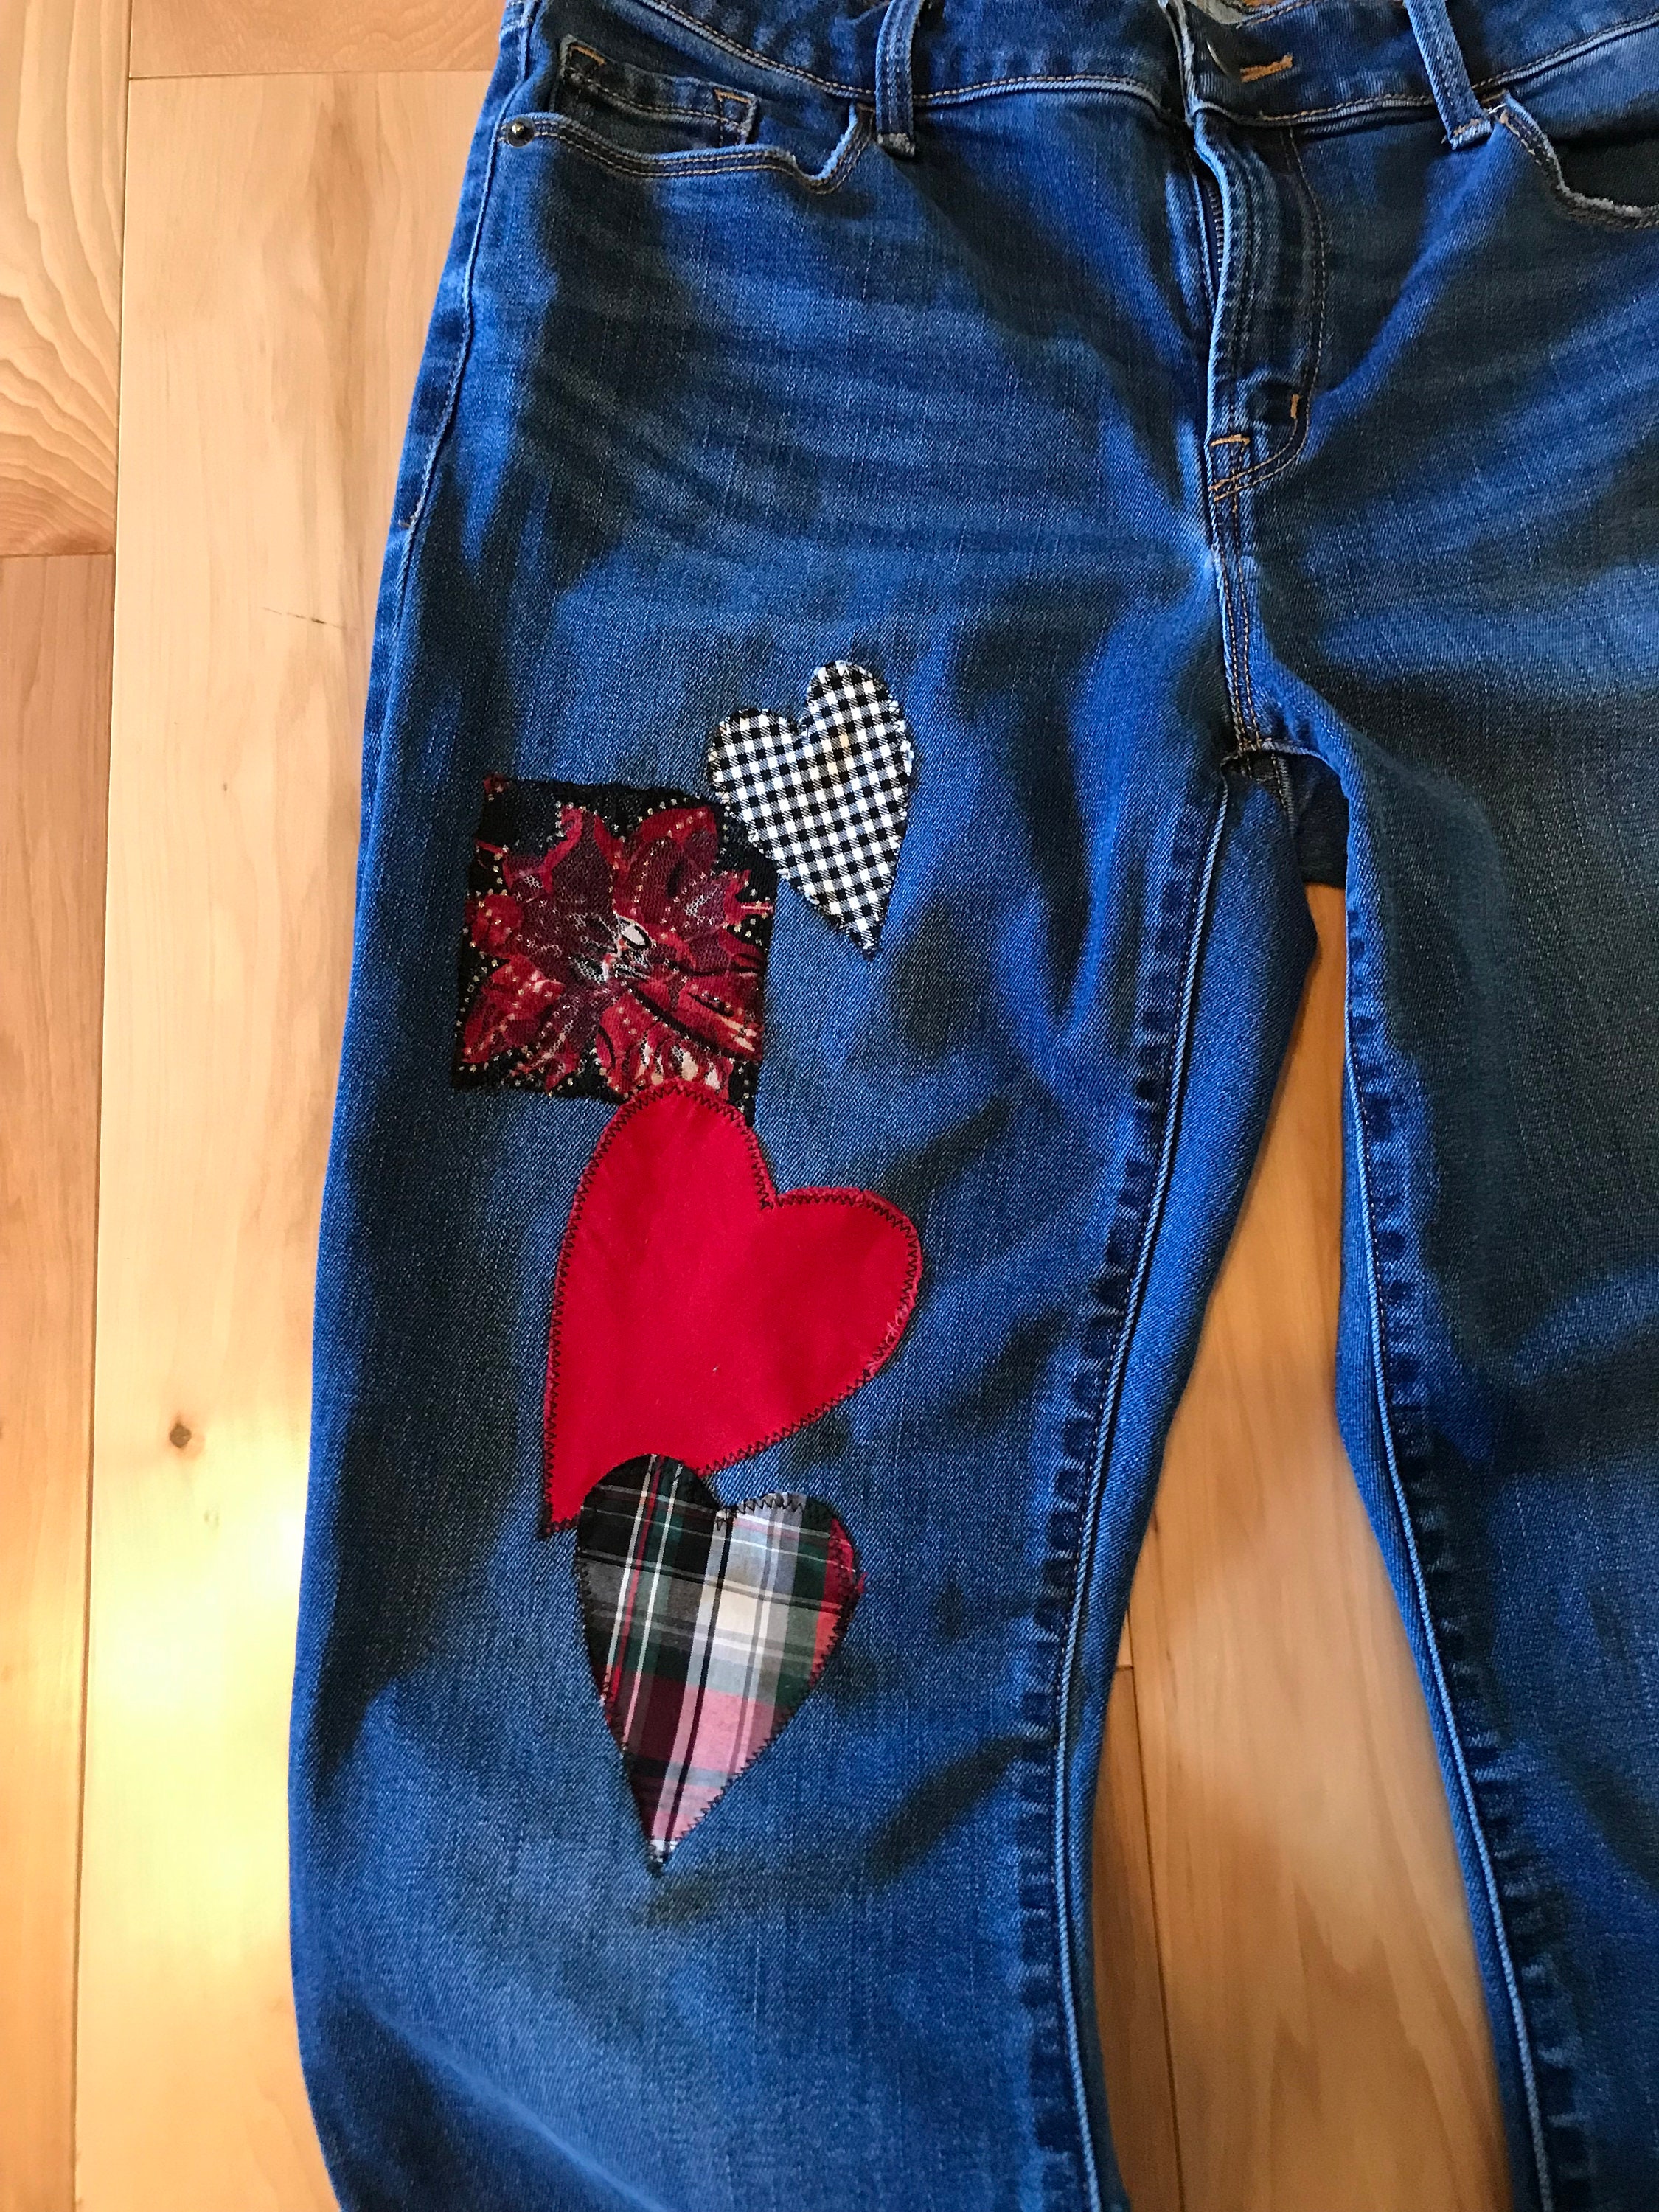 Distressed Patchwork Upcycled Jeans Women's Size 8 - Etsy